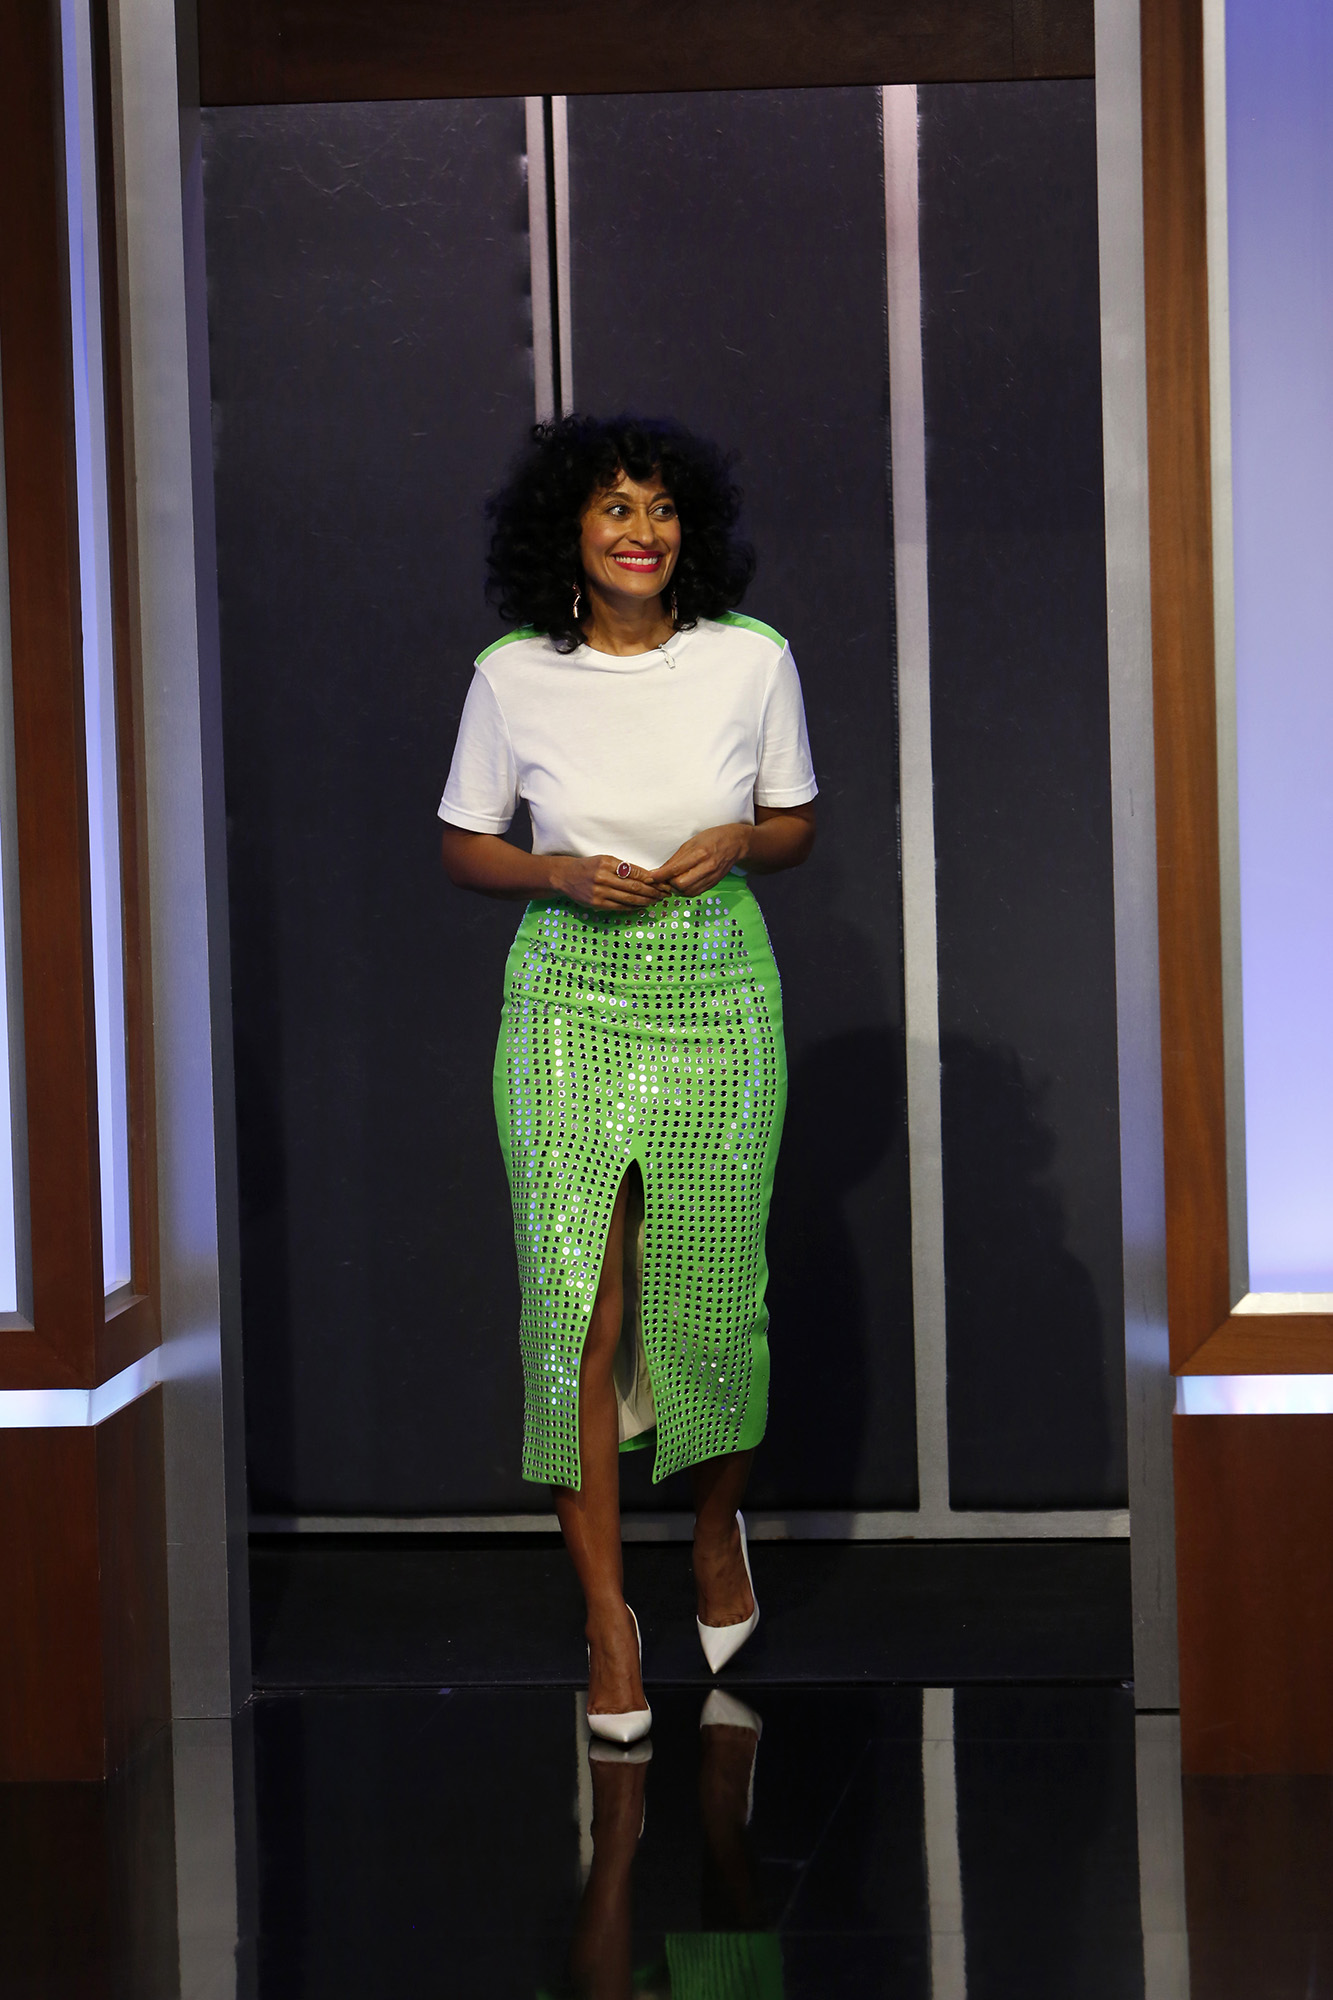 In Case You Missed It: Tracee Ellis Ross On Jimmy Kimmel Live